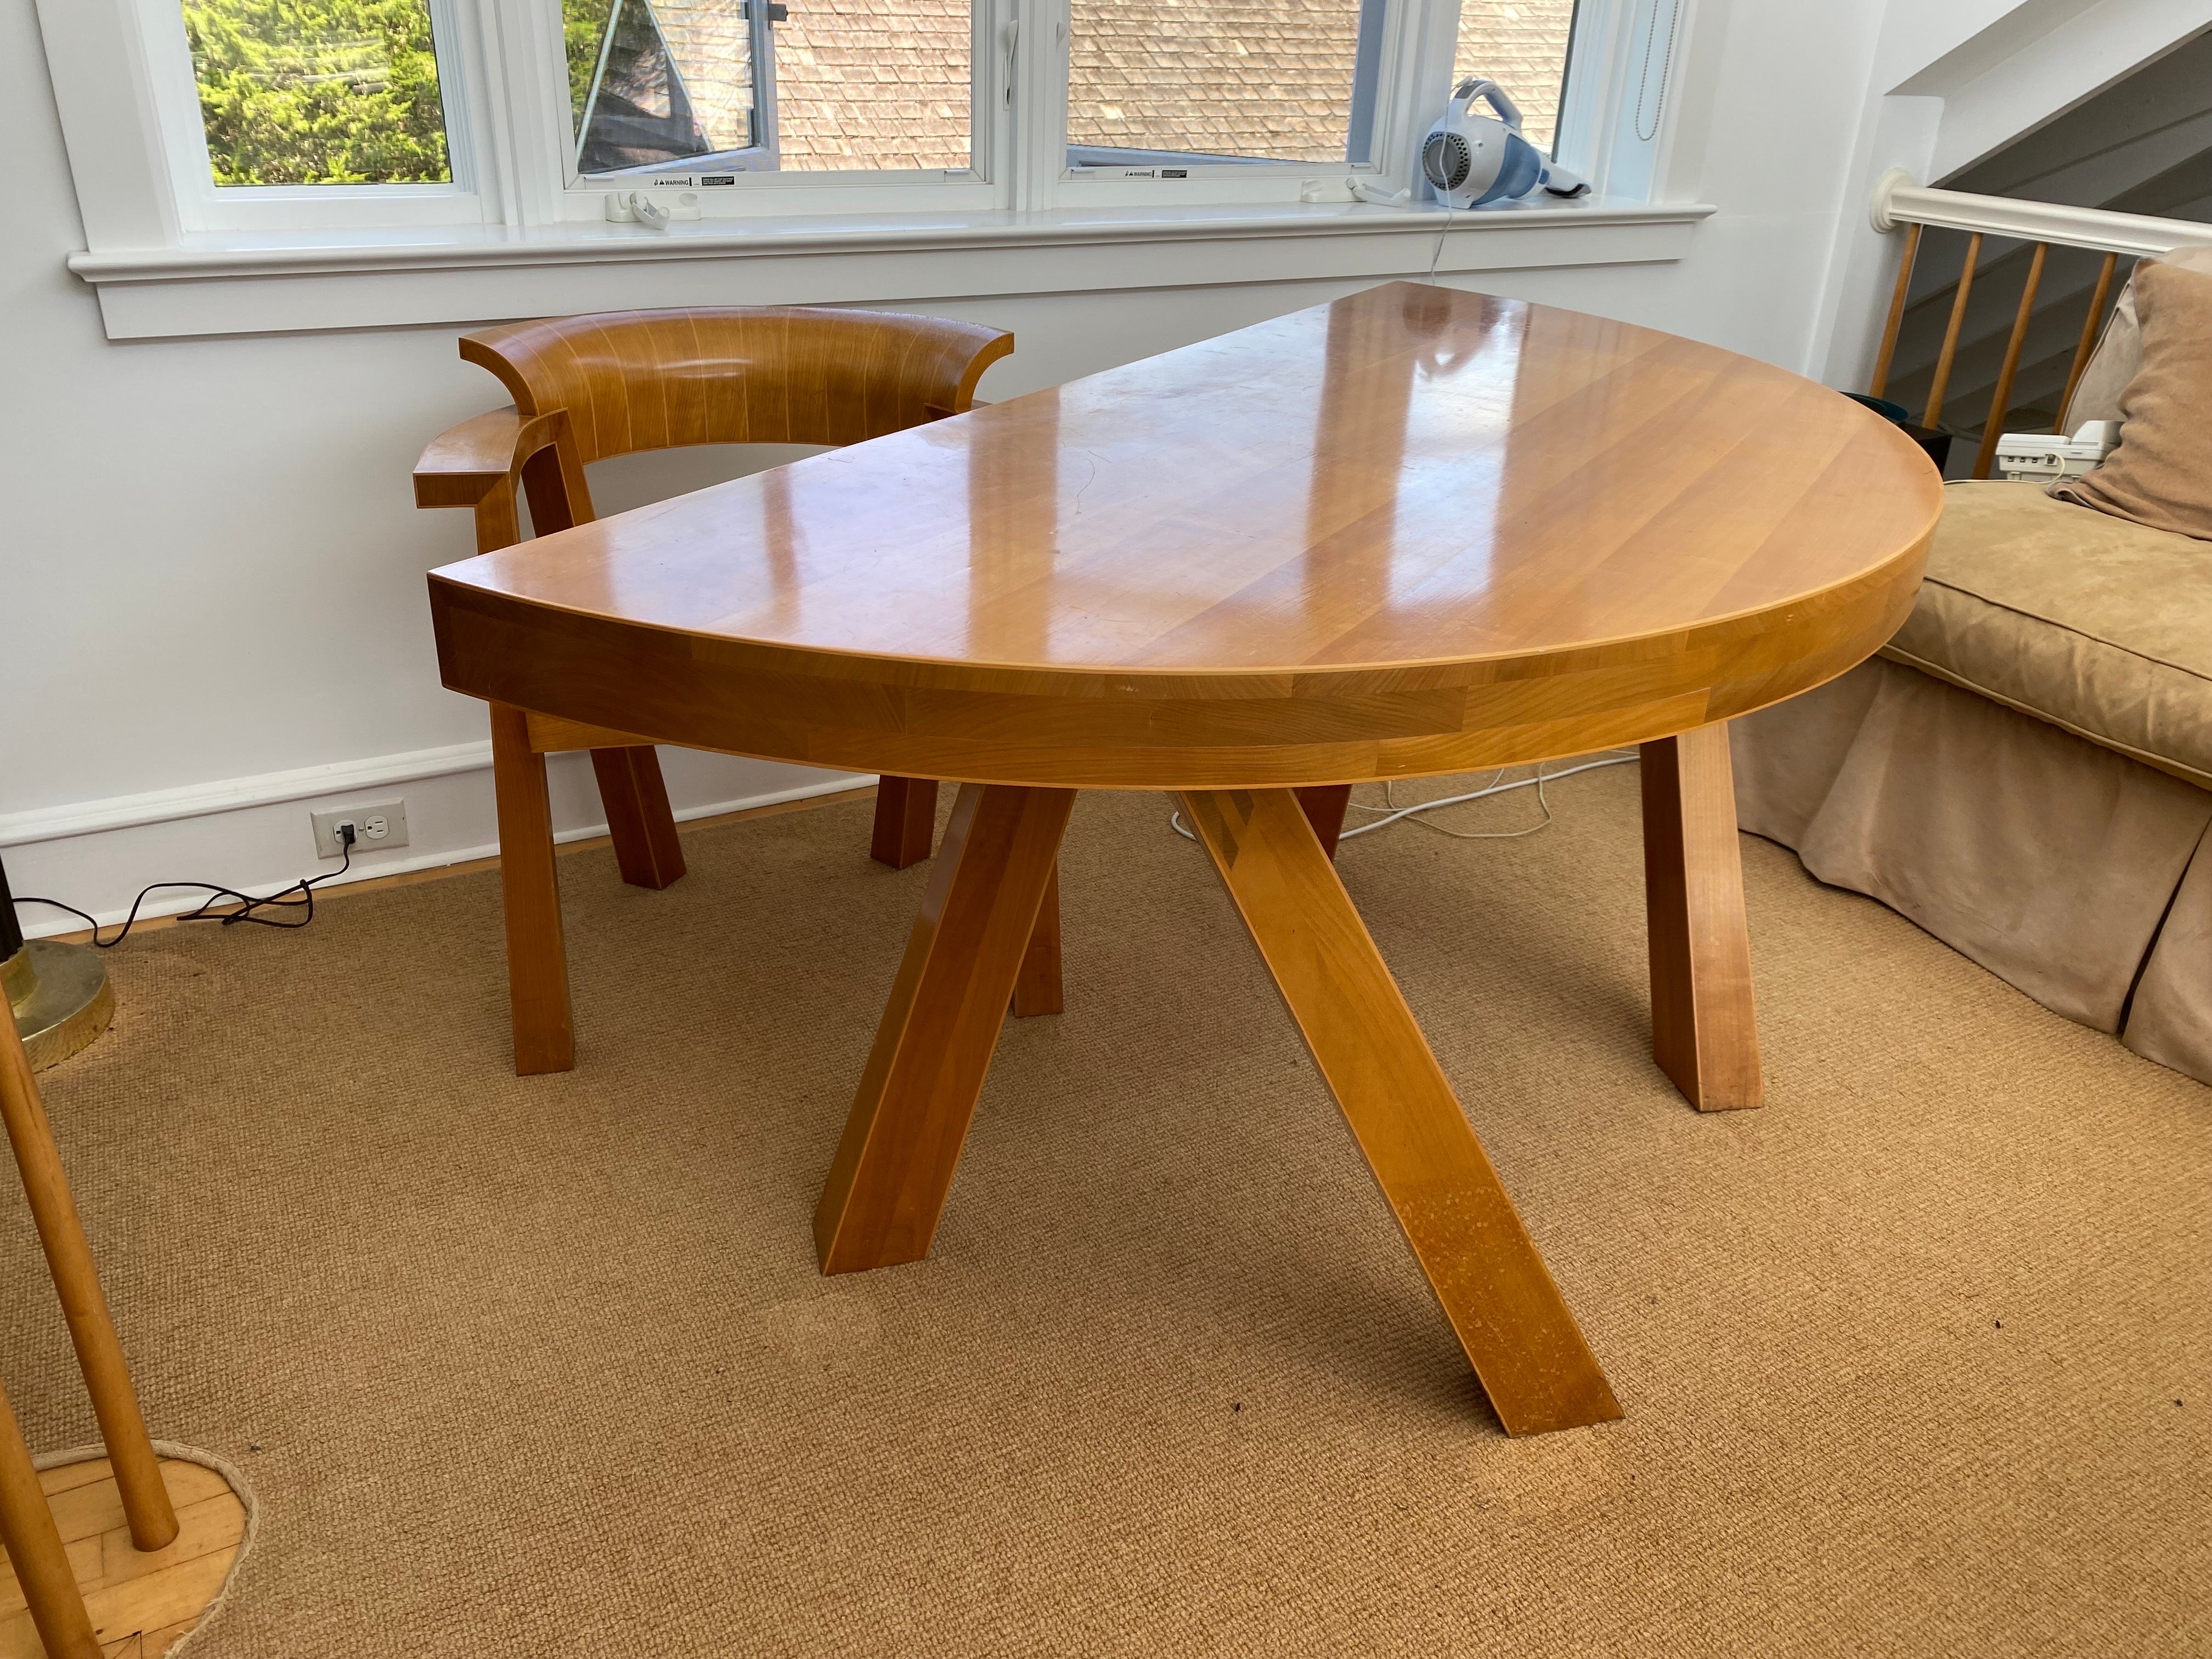 Late 20th Century Art Deco Style desk & chair crafted in Maple by English Furniture Maker, Rupert Williamson. A custom commissioned Art Deco style desk & chair set by the well collected Rupert Williamson. Crafted in maple and with a contrasting